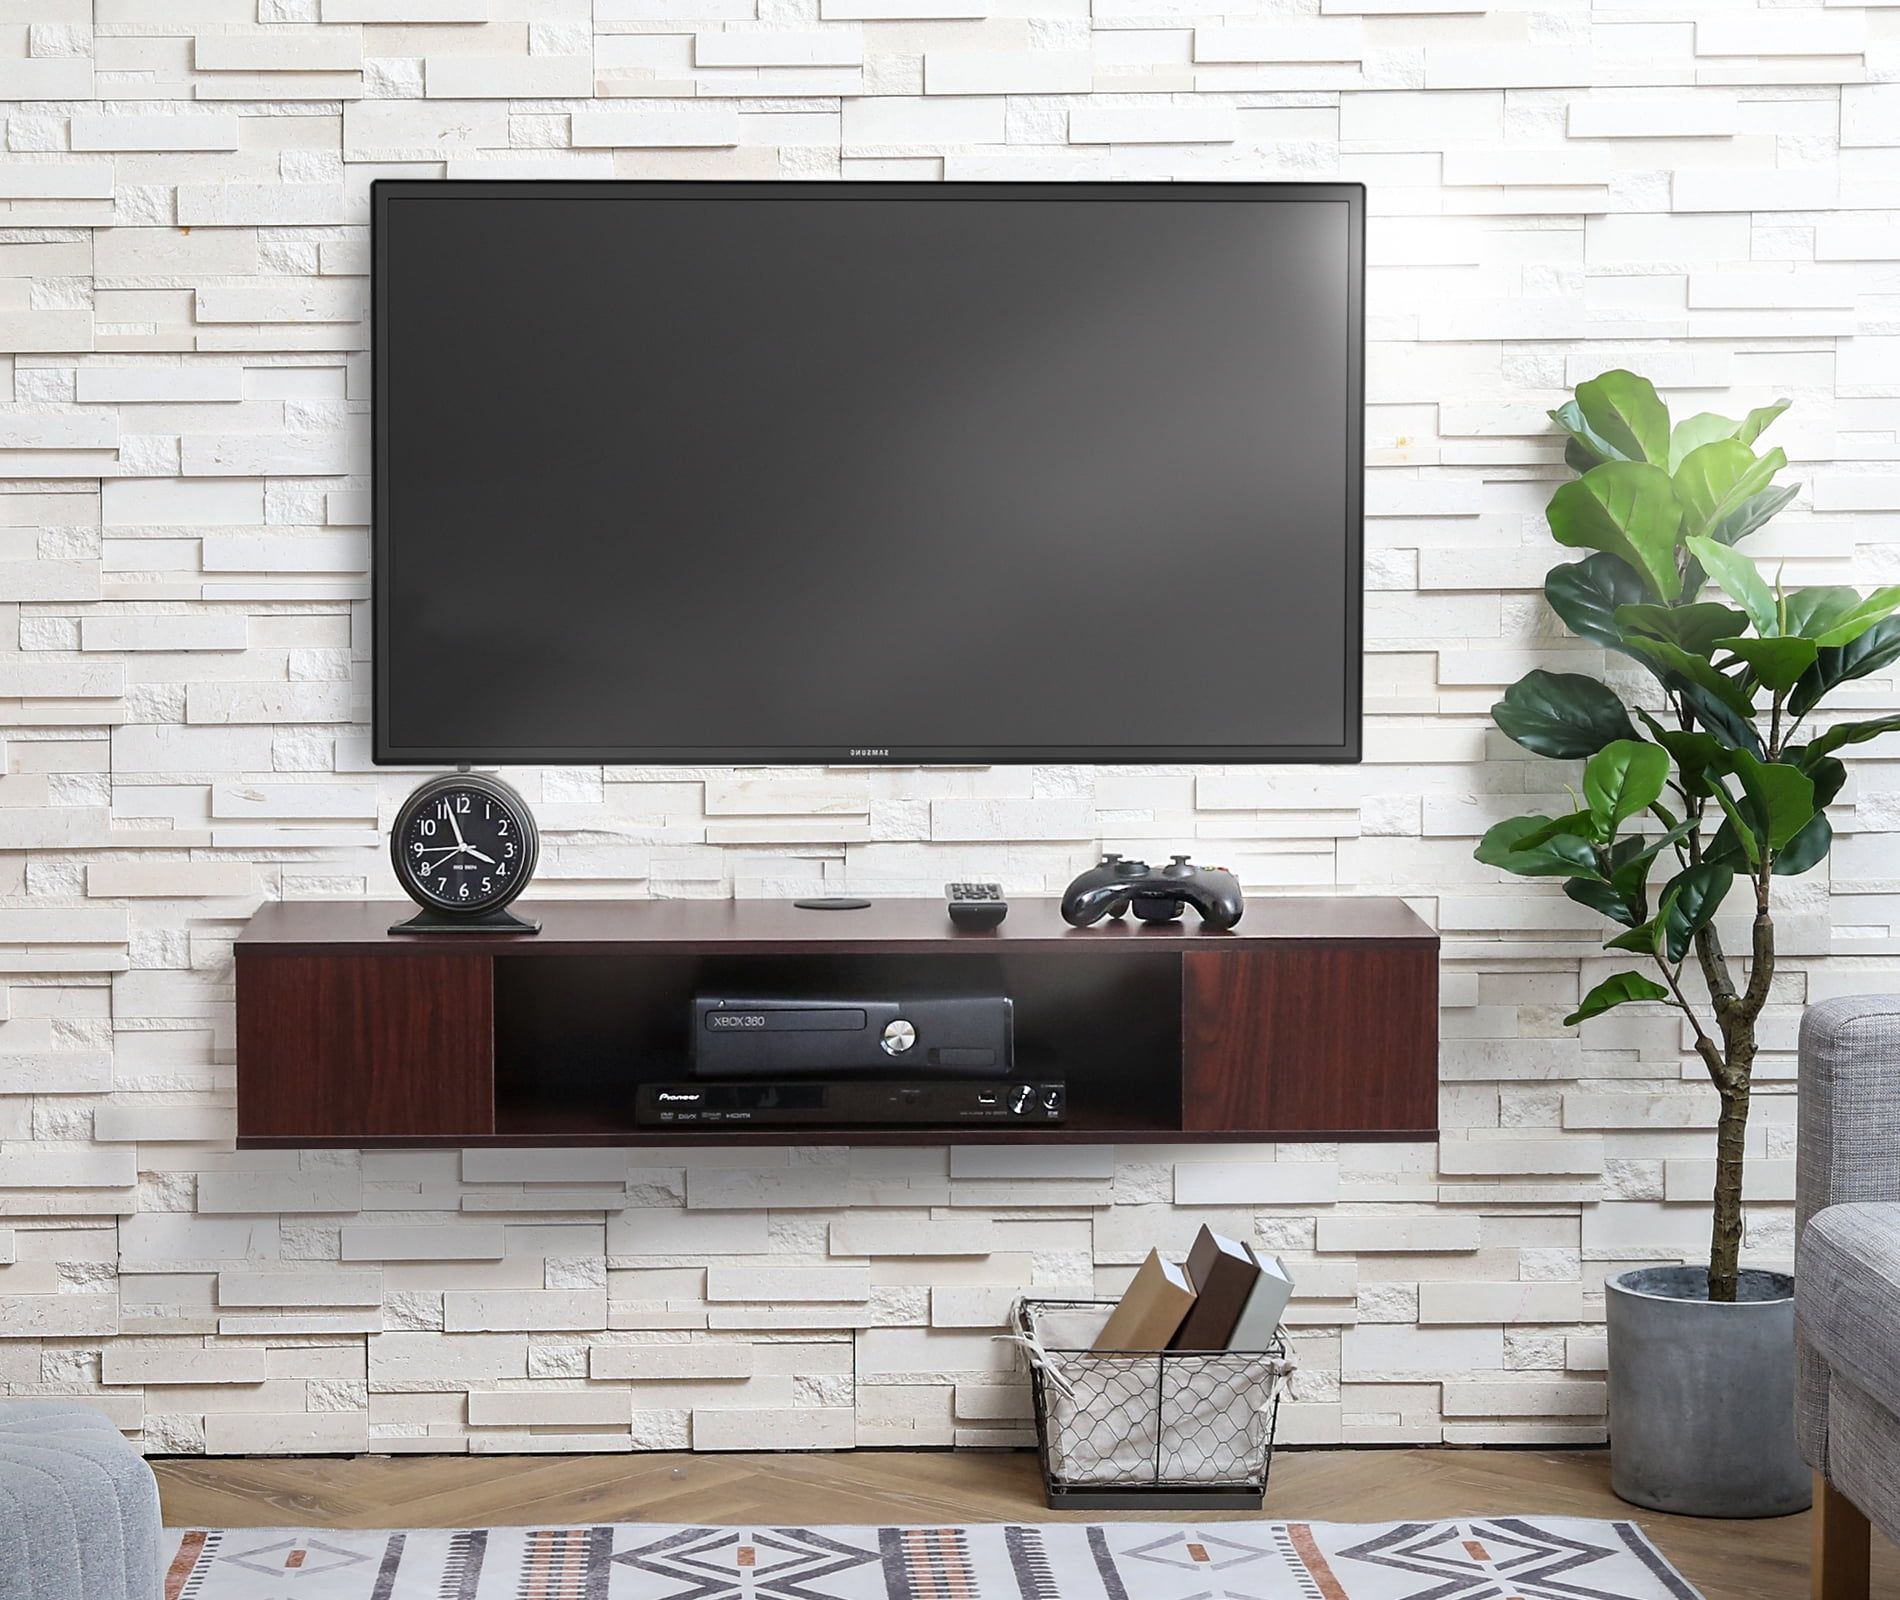 Fitueyes Wall Mounted Media Console,floating Tv Stand Component Shelf Intended For Top Shelf Mount Tv Stands (Gallery 11 of 20)